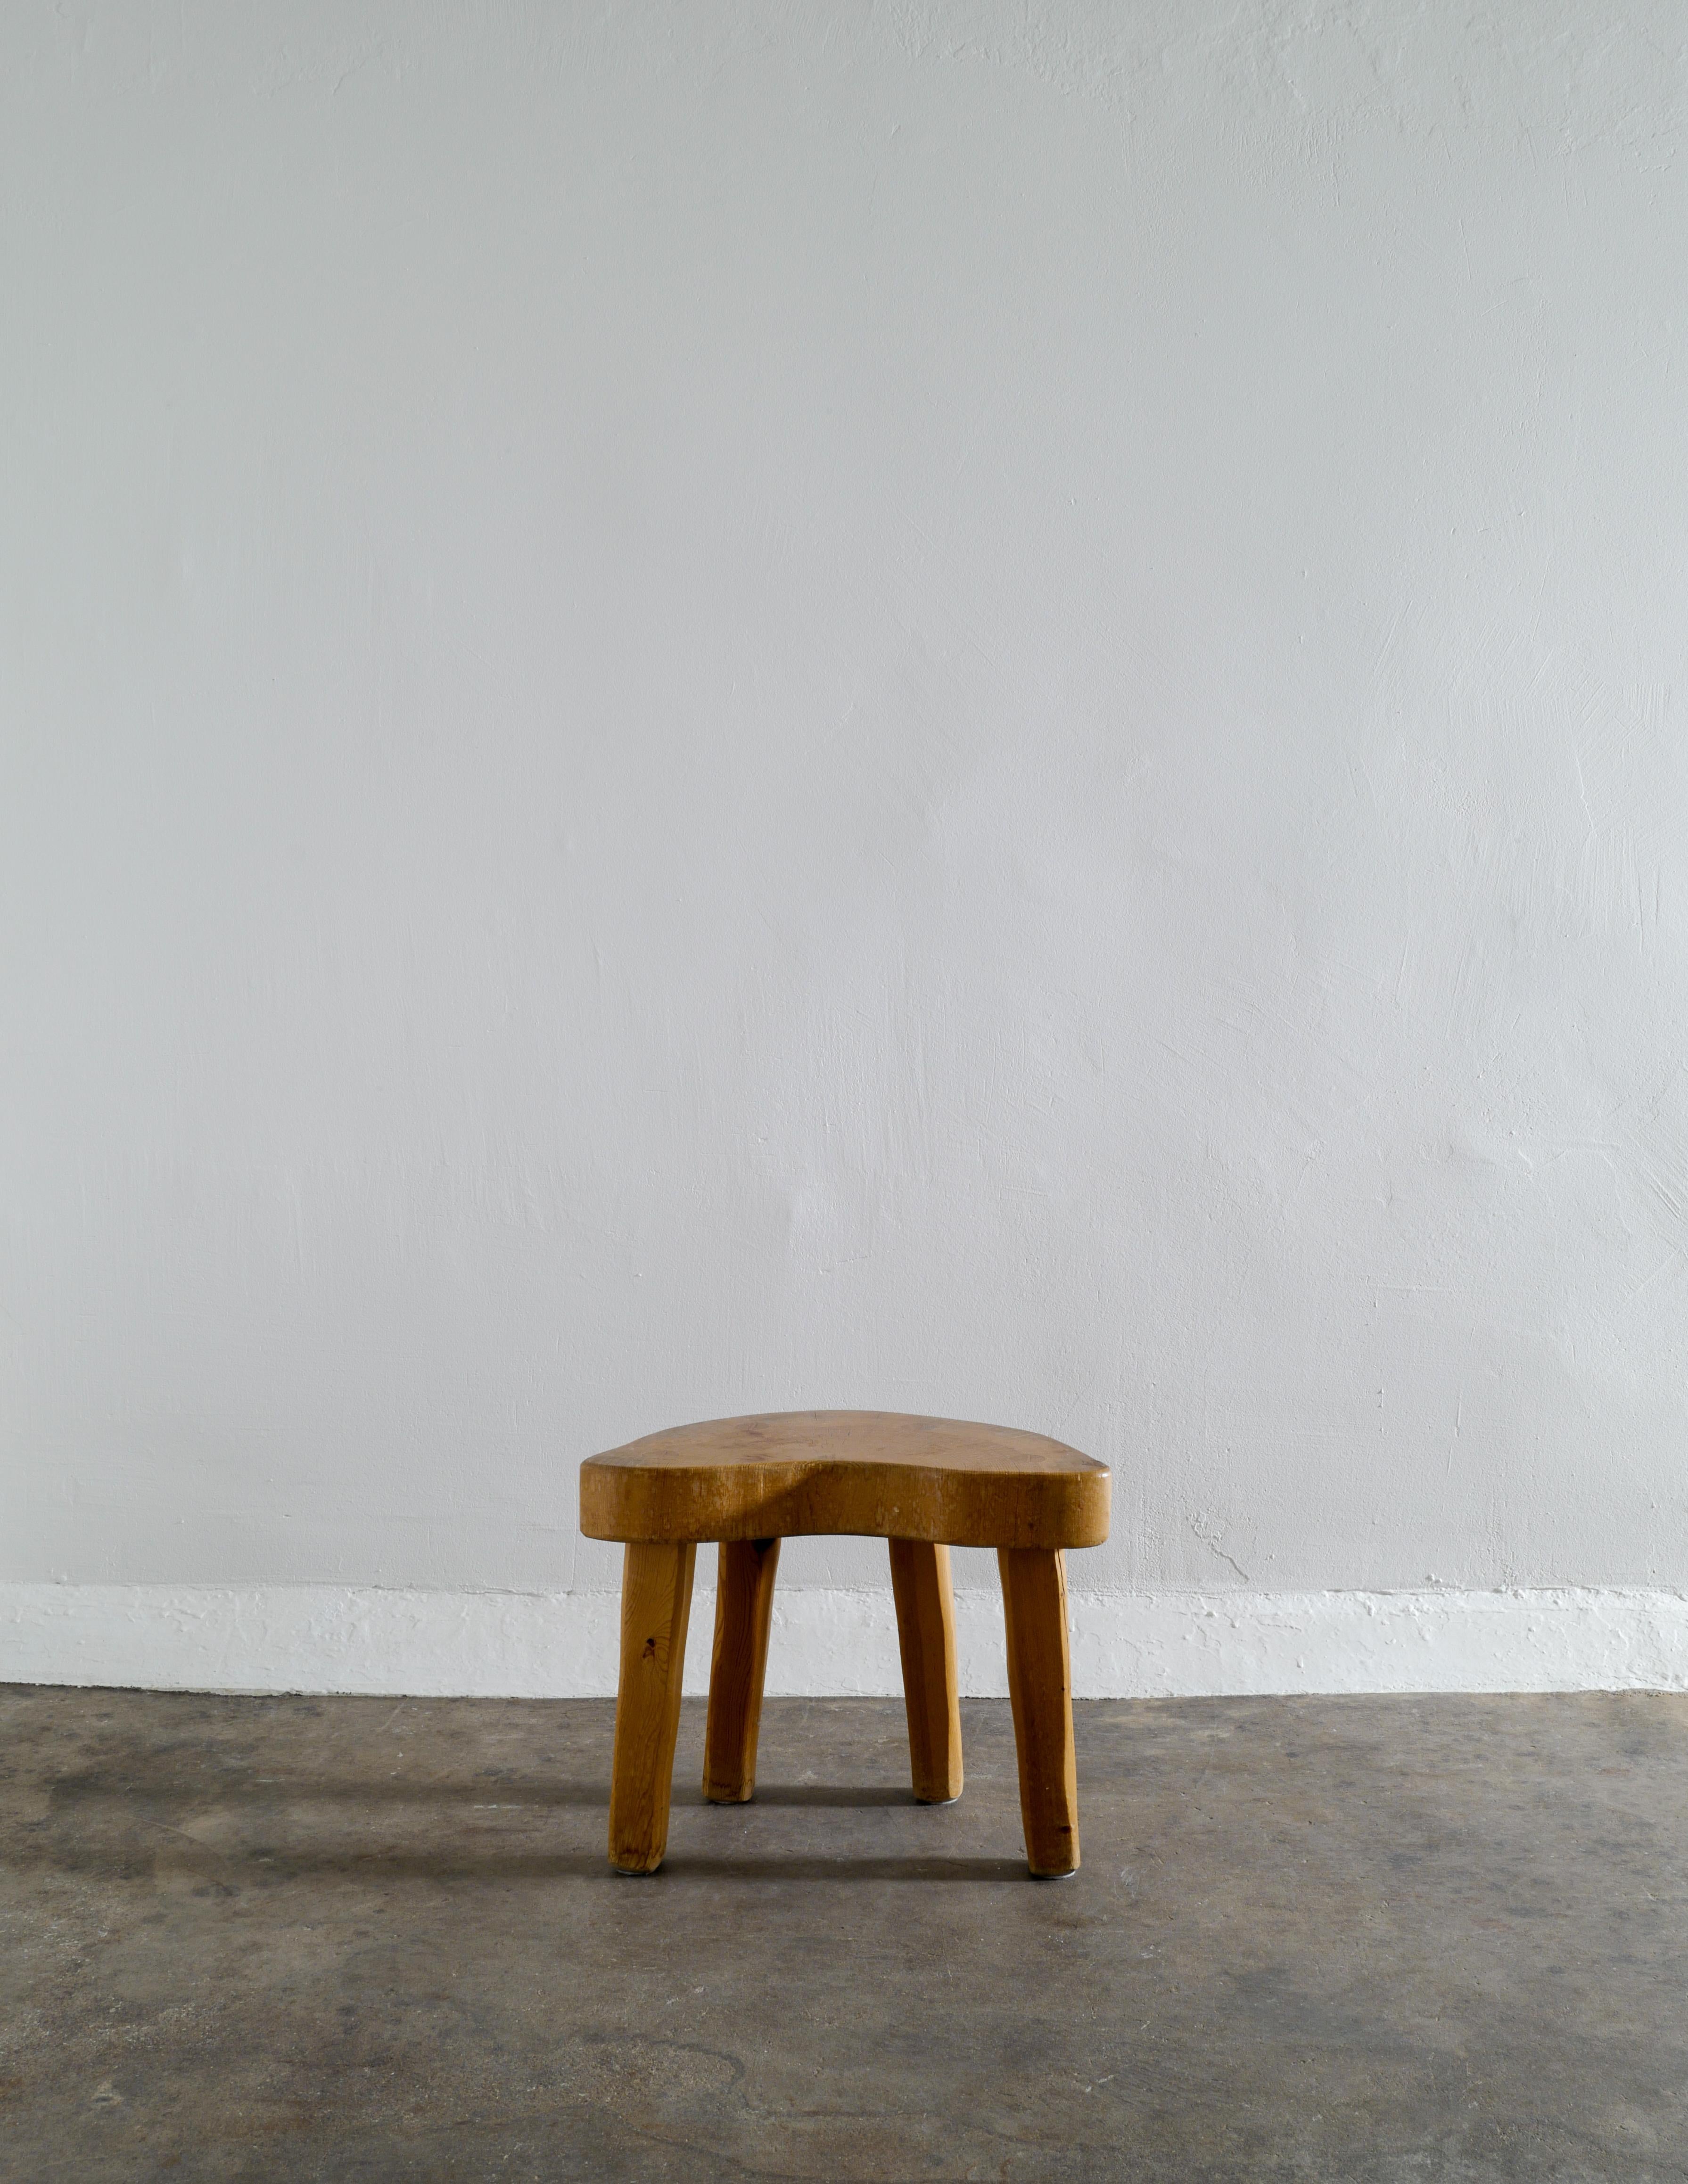 Rare banana stool or side table in pine by unknown designer from the 1940s. In good vintage condition and showing nice patina from age and use.